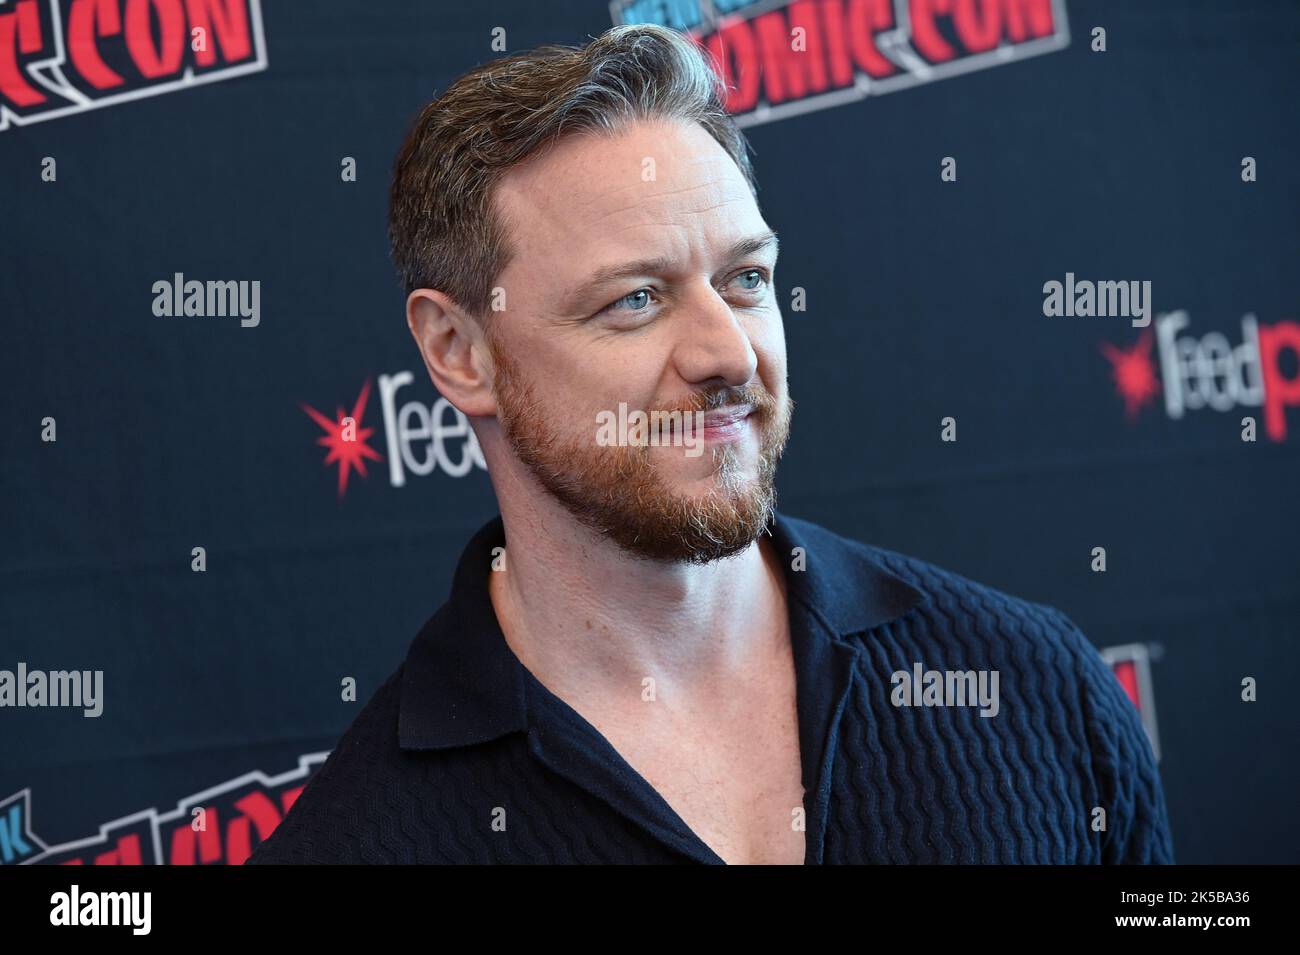 New York, United States. 06th Oct, 2022. Actor James McAvoy poses during the “His Dark Materials” press roundtable at the 2022 New York Comic Con in New York, NY, October 6, 2022. (Photo by Anthony Behar/Sipa USA) Credit: Sipa USA/Alamy Live News Stock Photo